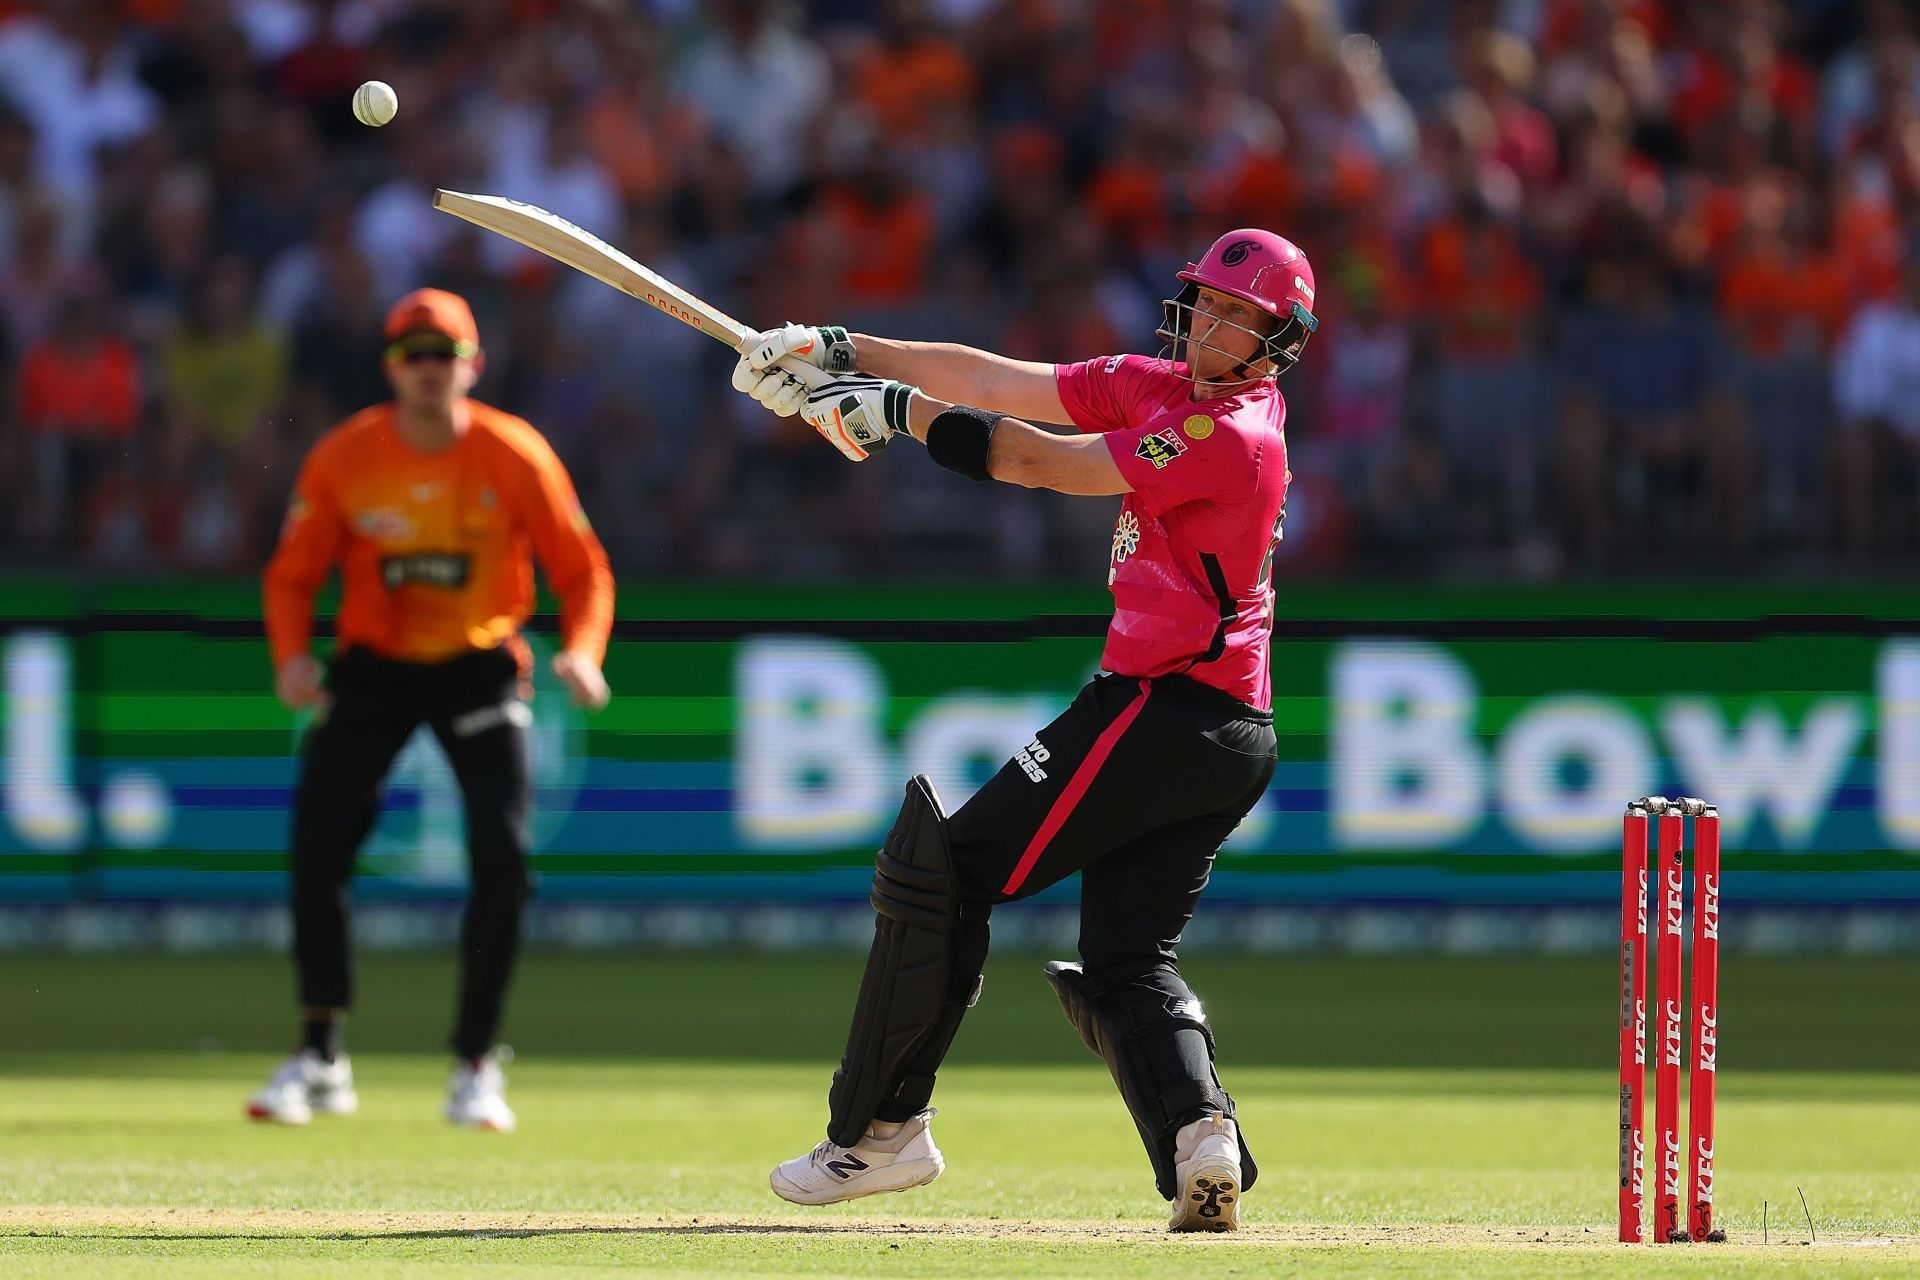 BBL - The Qualifier: Perth Scorchers v Sydney Sixers